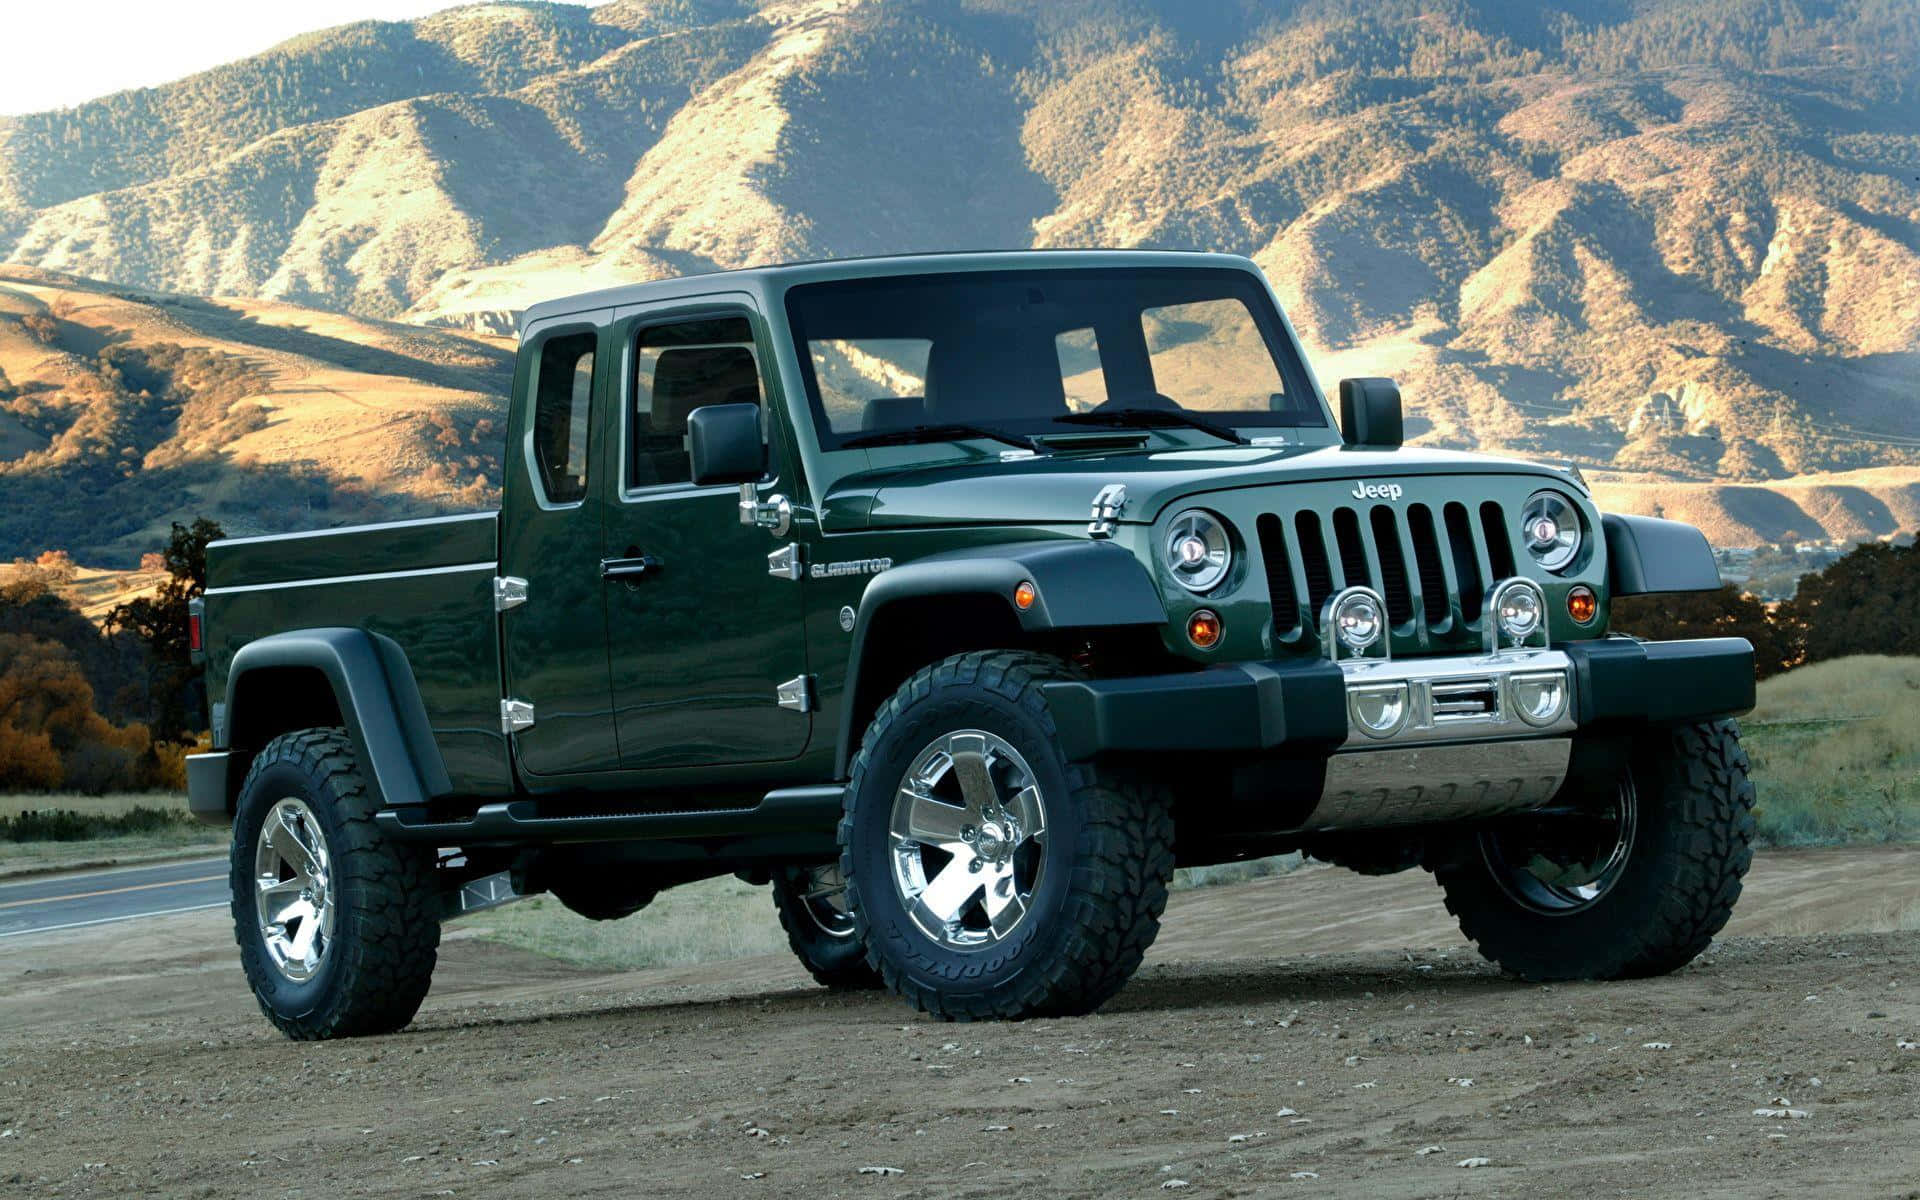 Stunning Jeep Gladiator on an off-road adventure Wallpaper